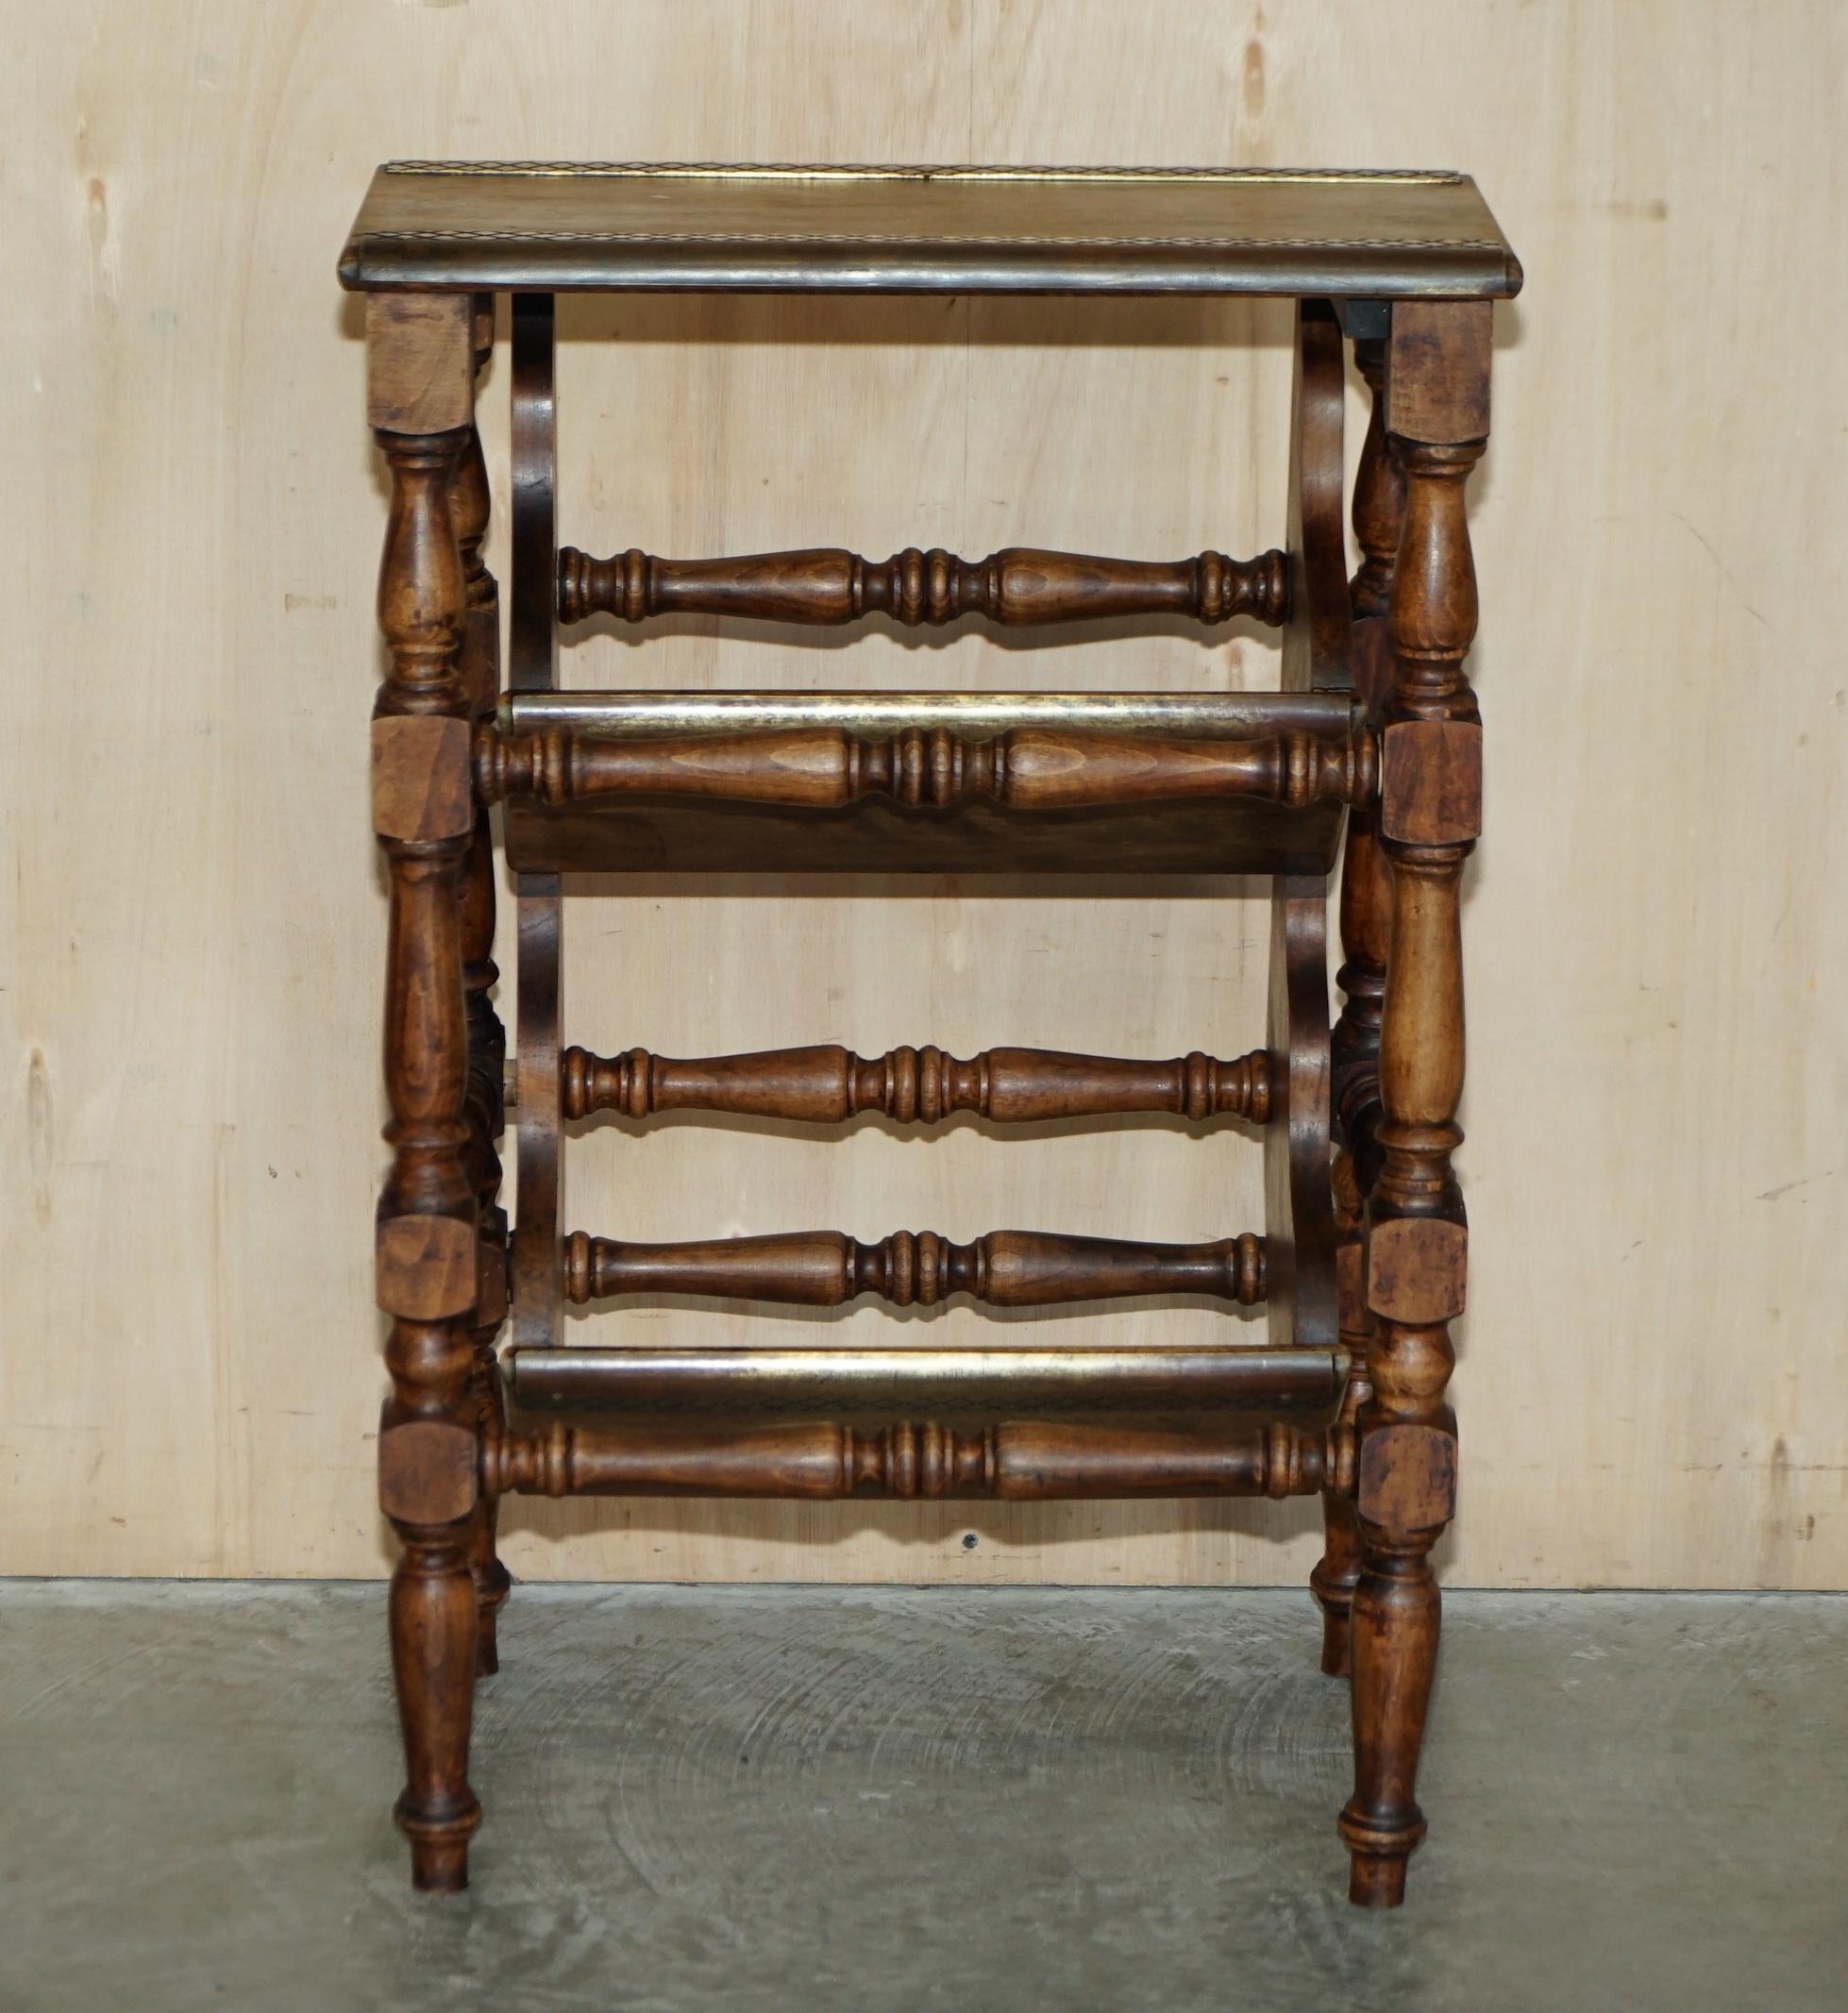 Table d'appoint antique Arts & Crafts Metamorphic Library Steps Ladder en laiton Tread 6